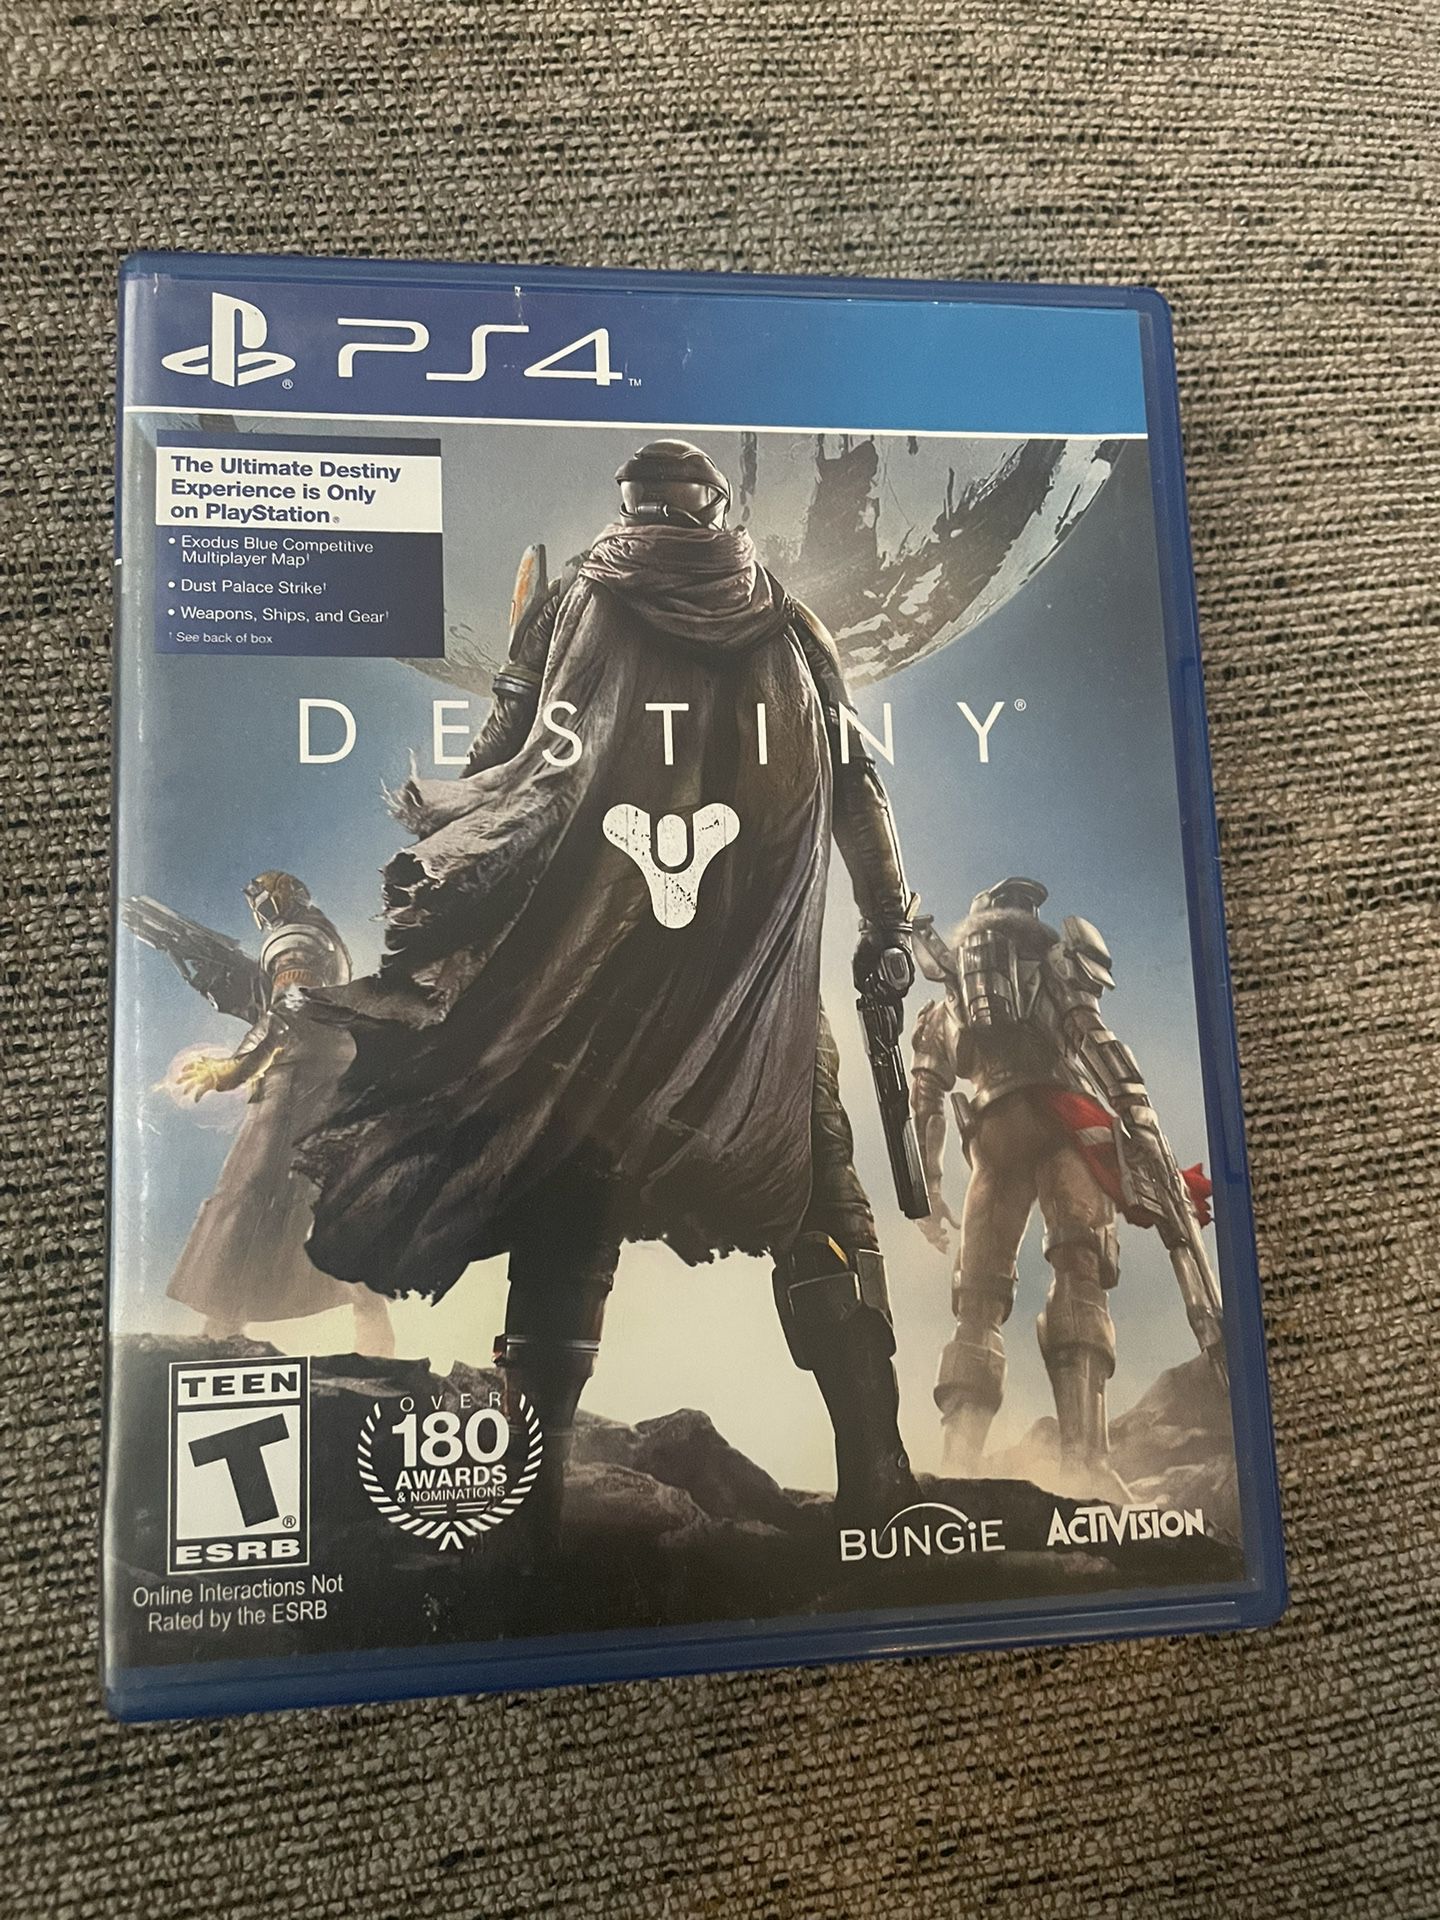 Destiny (Sony PlayStation 4, 2014) Collectors Edition Complete Set